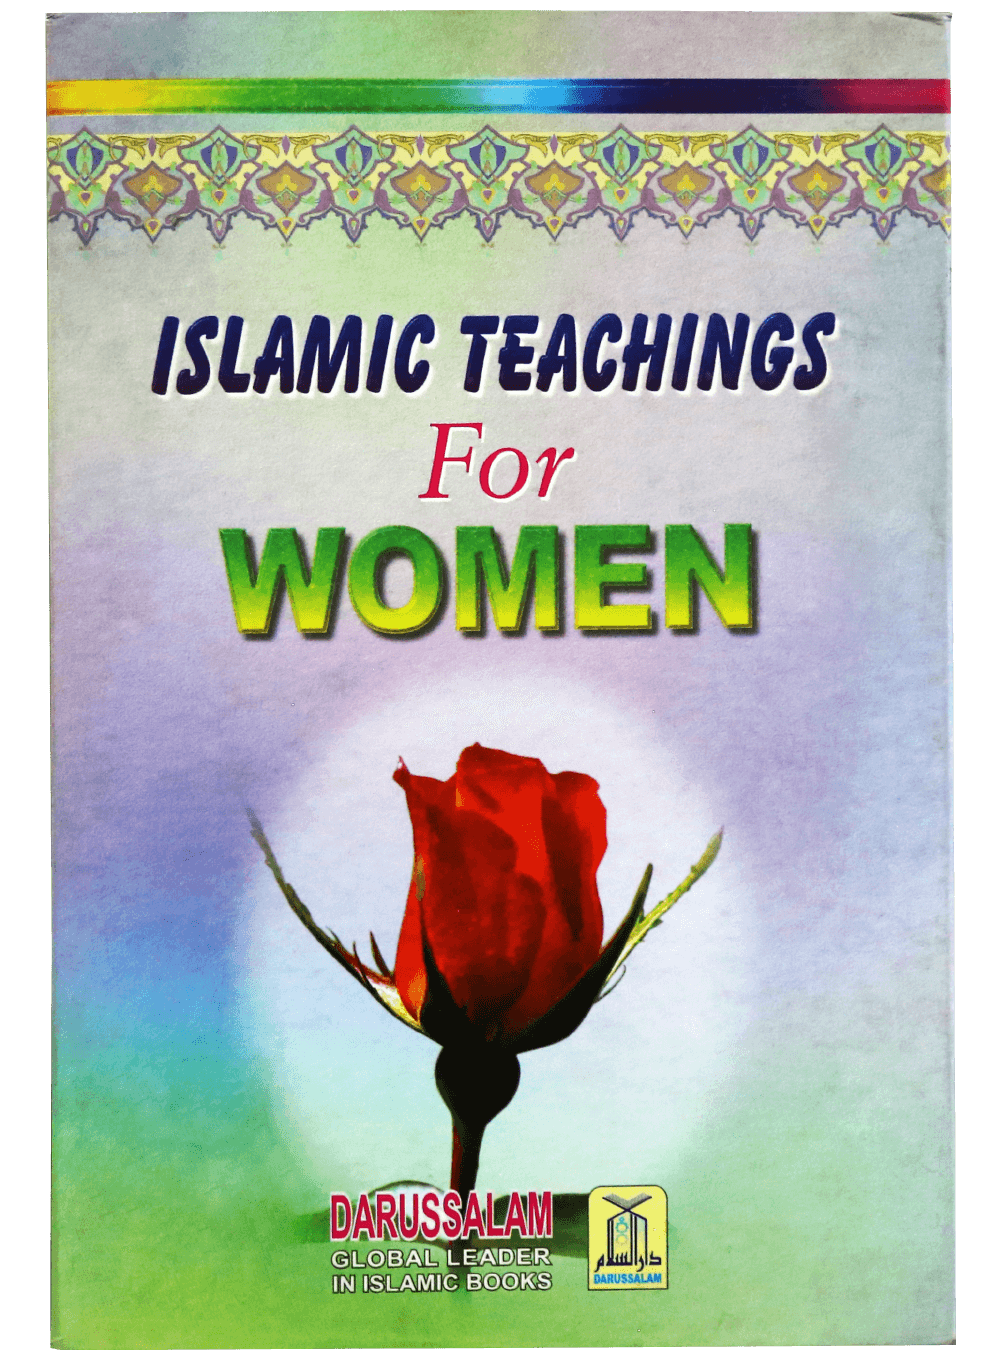 islamic-teachings-for-women-6-books-by-d-darussalam-20180531-110220